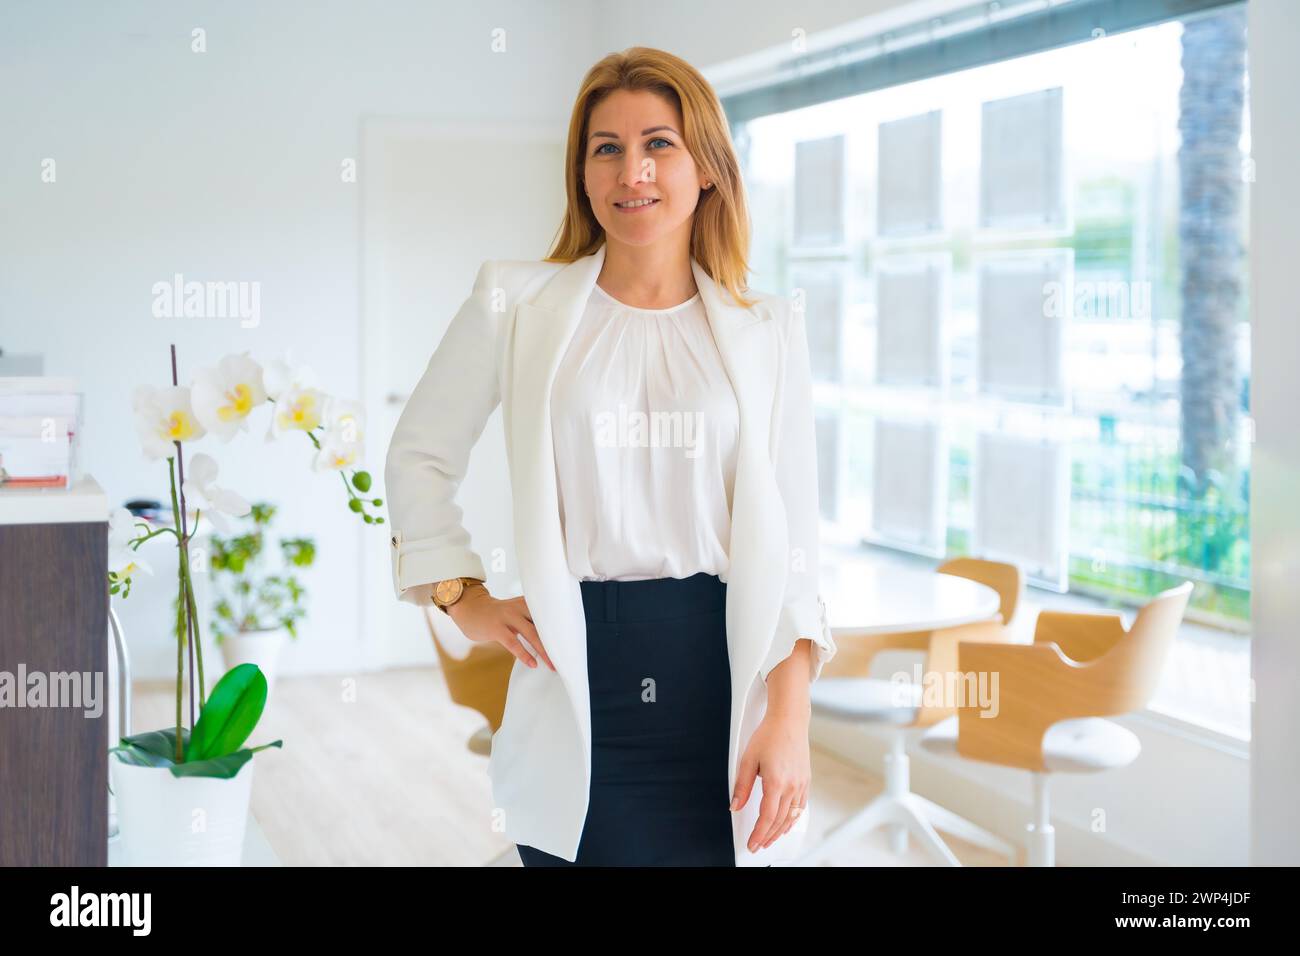 Horizontal portrait of a female chic real estate agent standing proud in the office Stock Photo